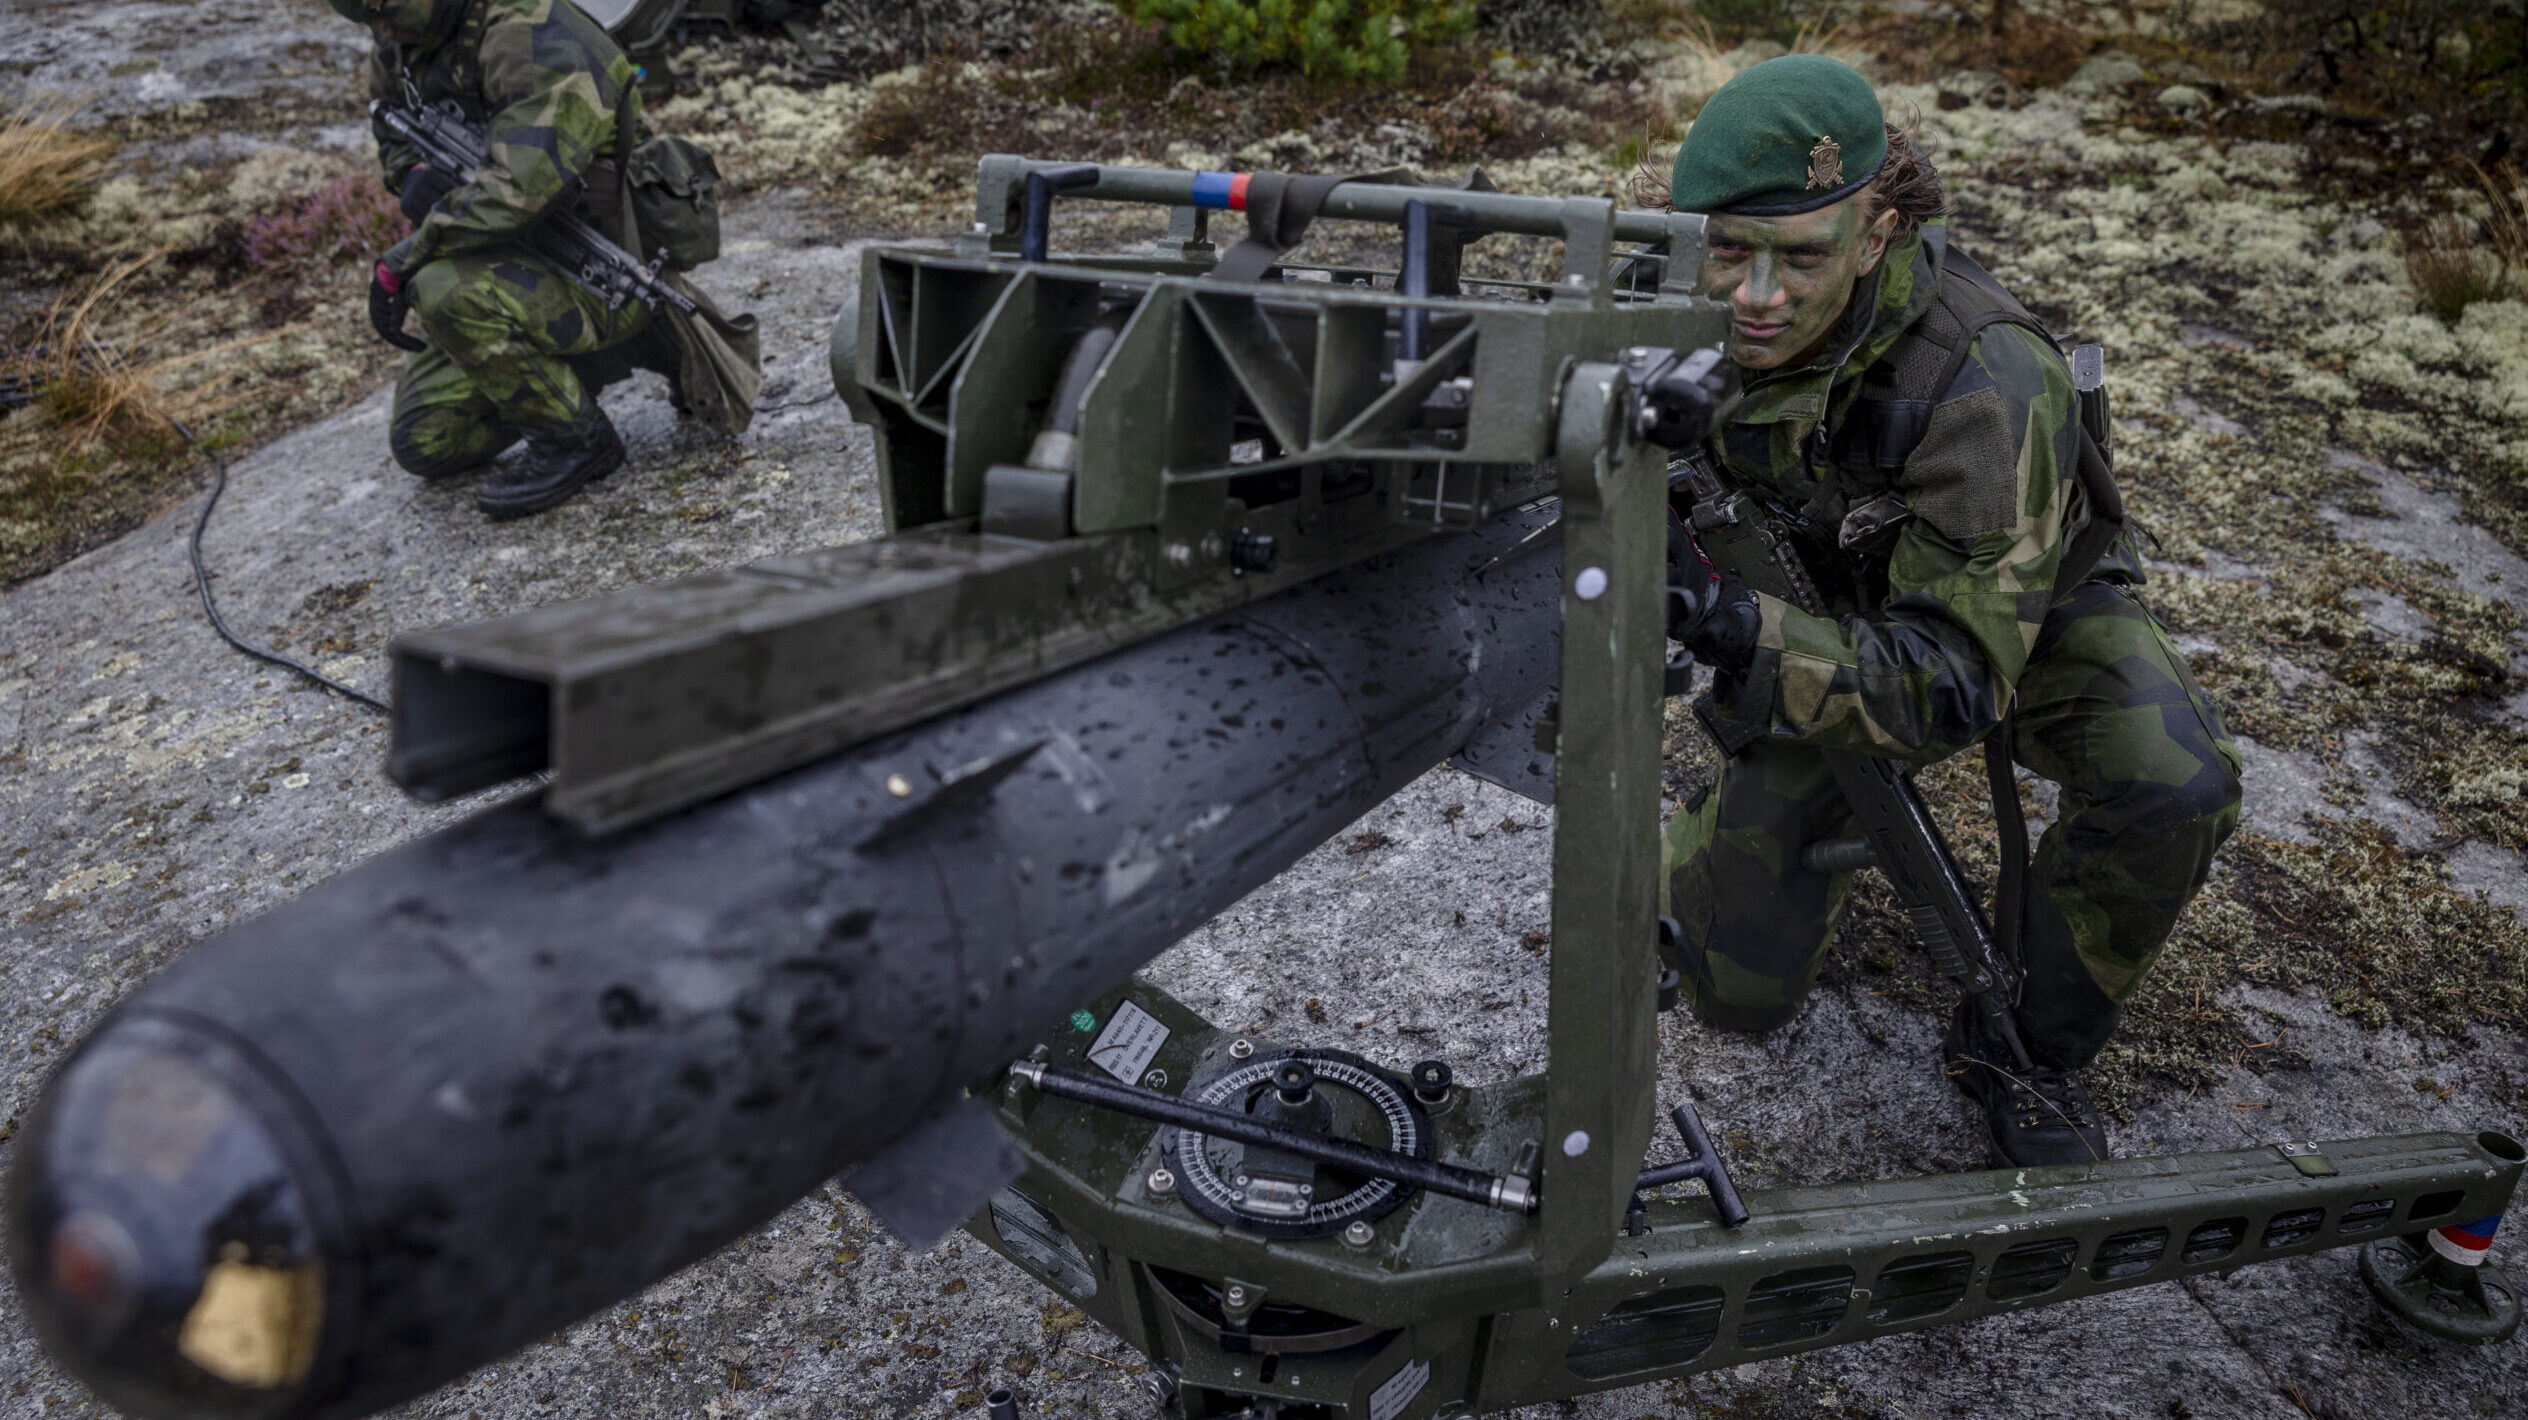 Training Drill Of Stockholm Amphibious Regiment And Forces From The US Marine Corps